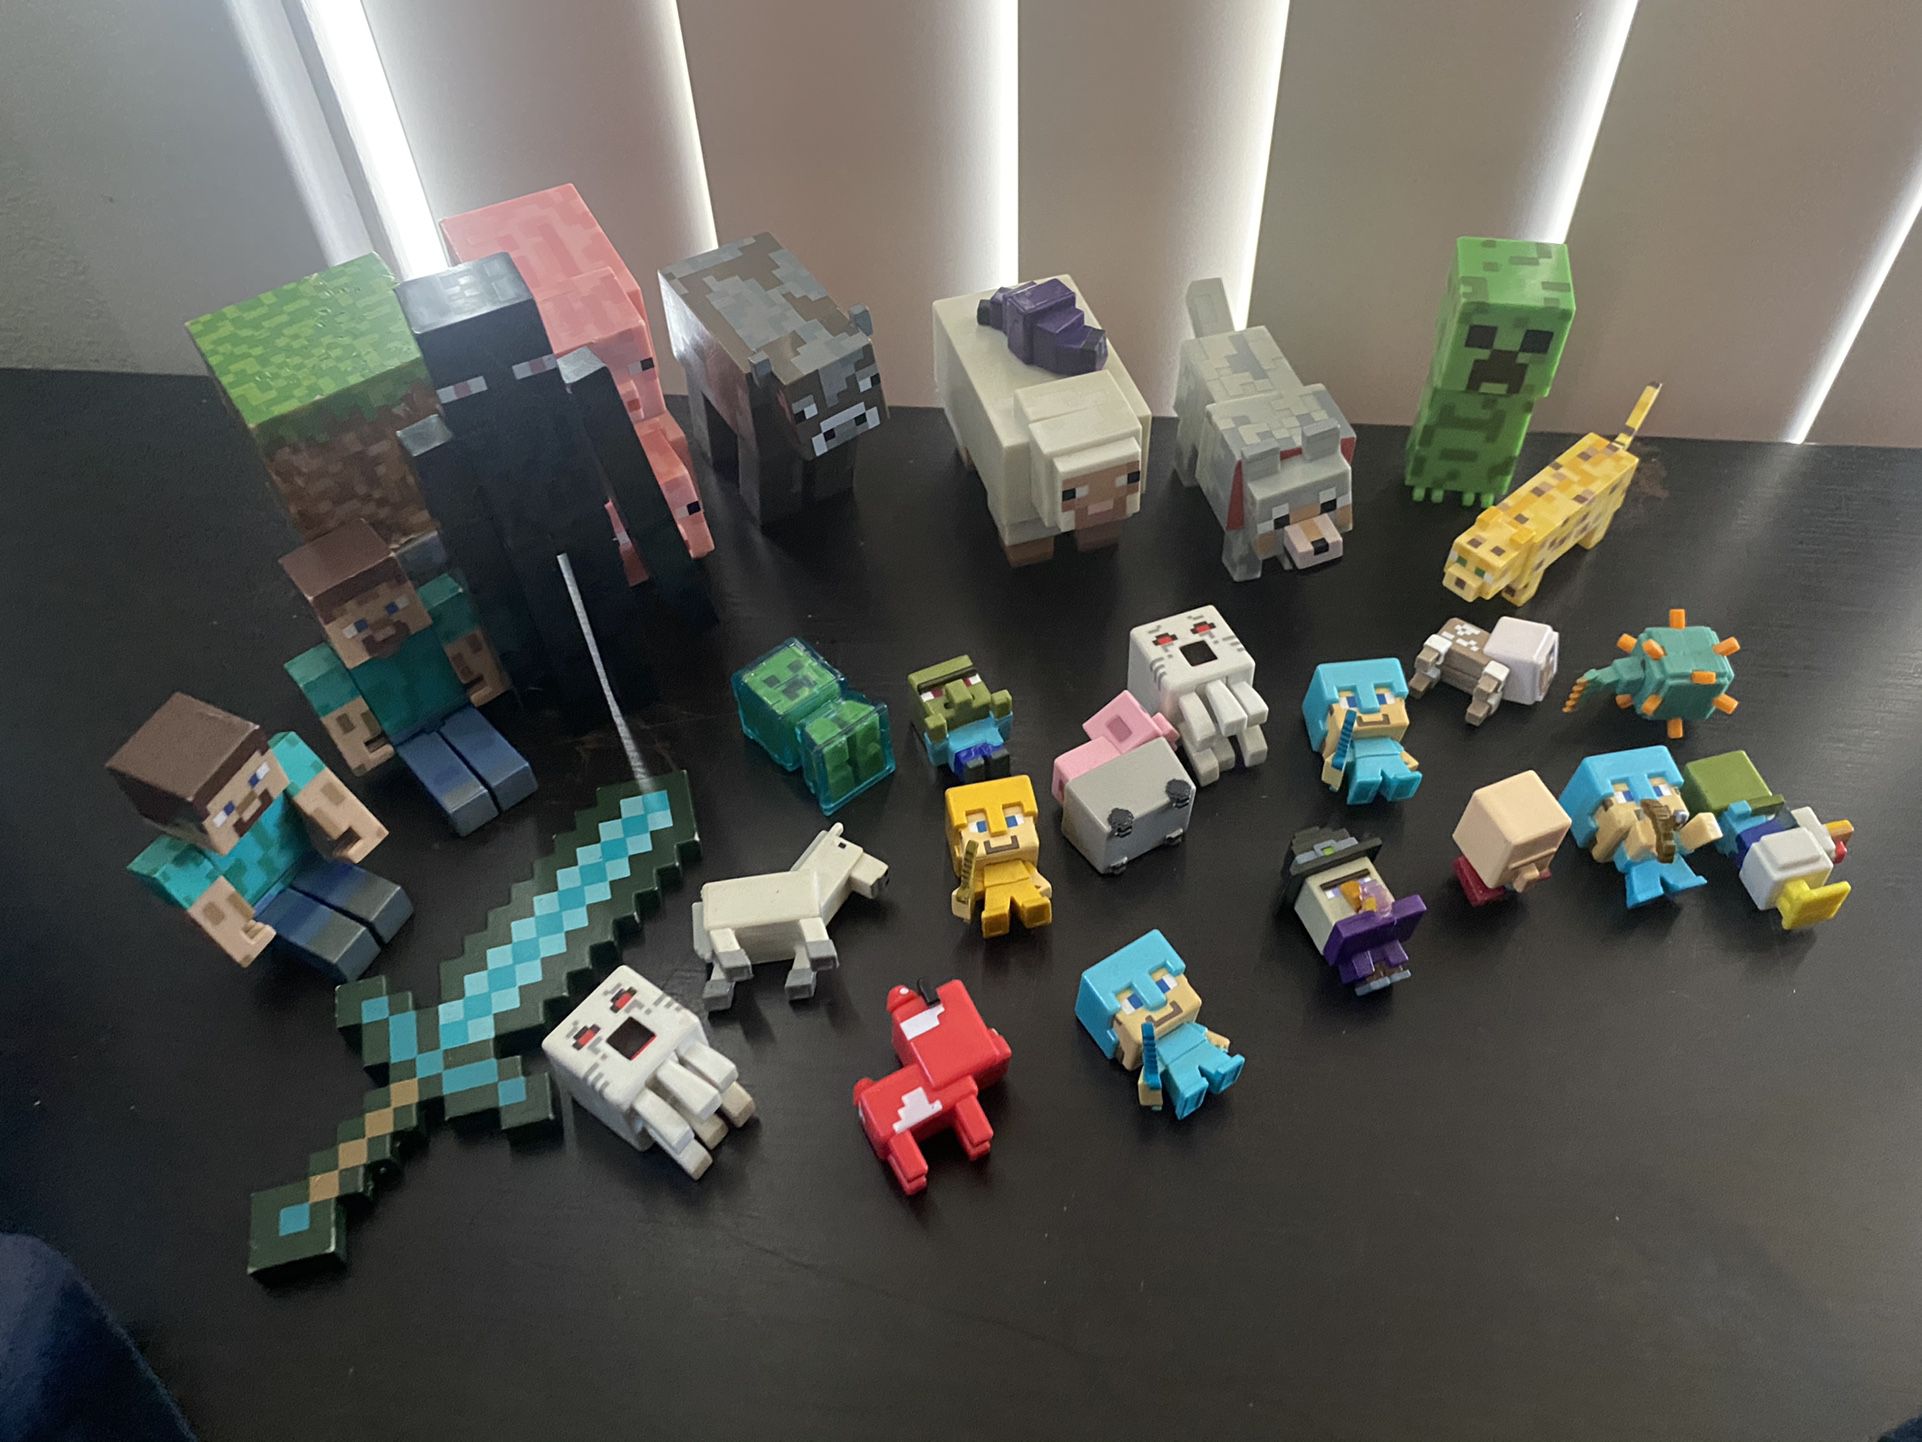 Minecraft & ROBLOX Toys for Sale in Huntington Beach, CA - OfferUp